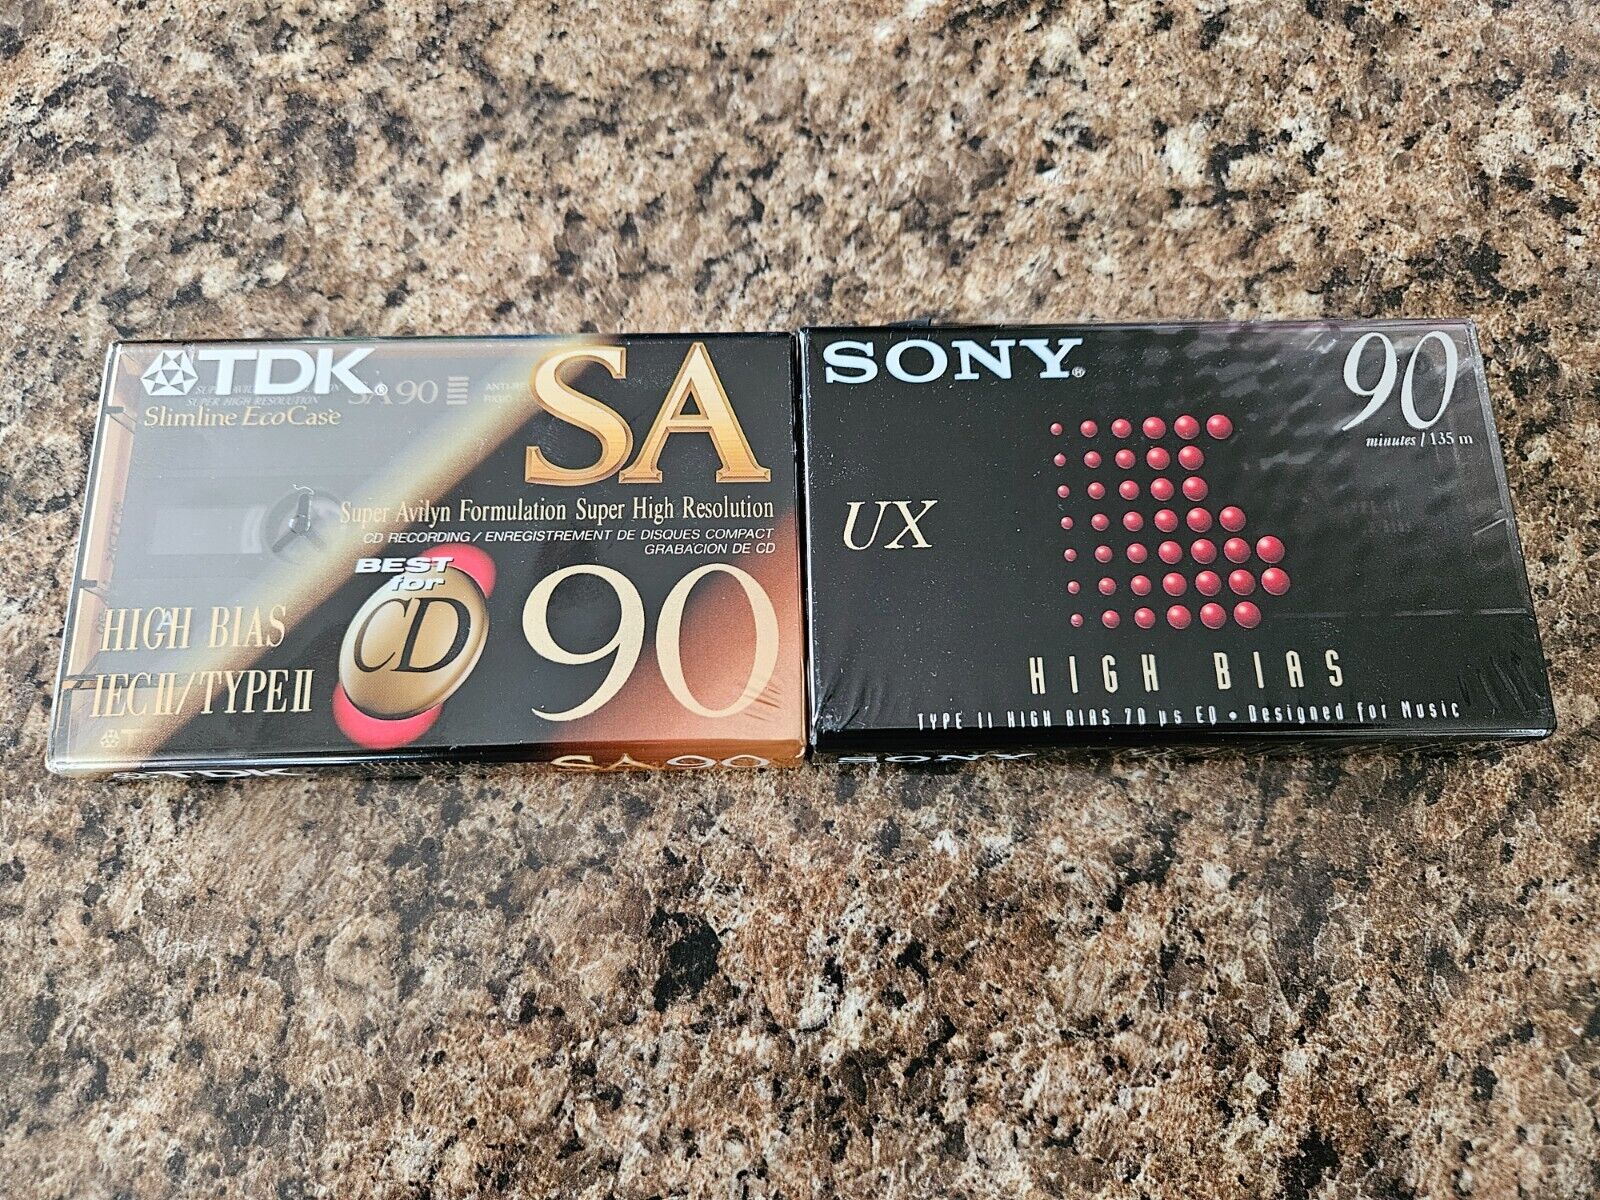 2 new SEALED TYPE II HIGH BIAS 90 MINUTE CASSETTE TAPES TDK SA 90, SONY UX 90